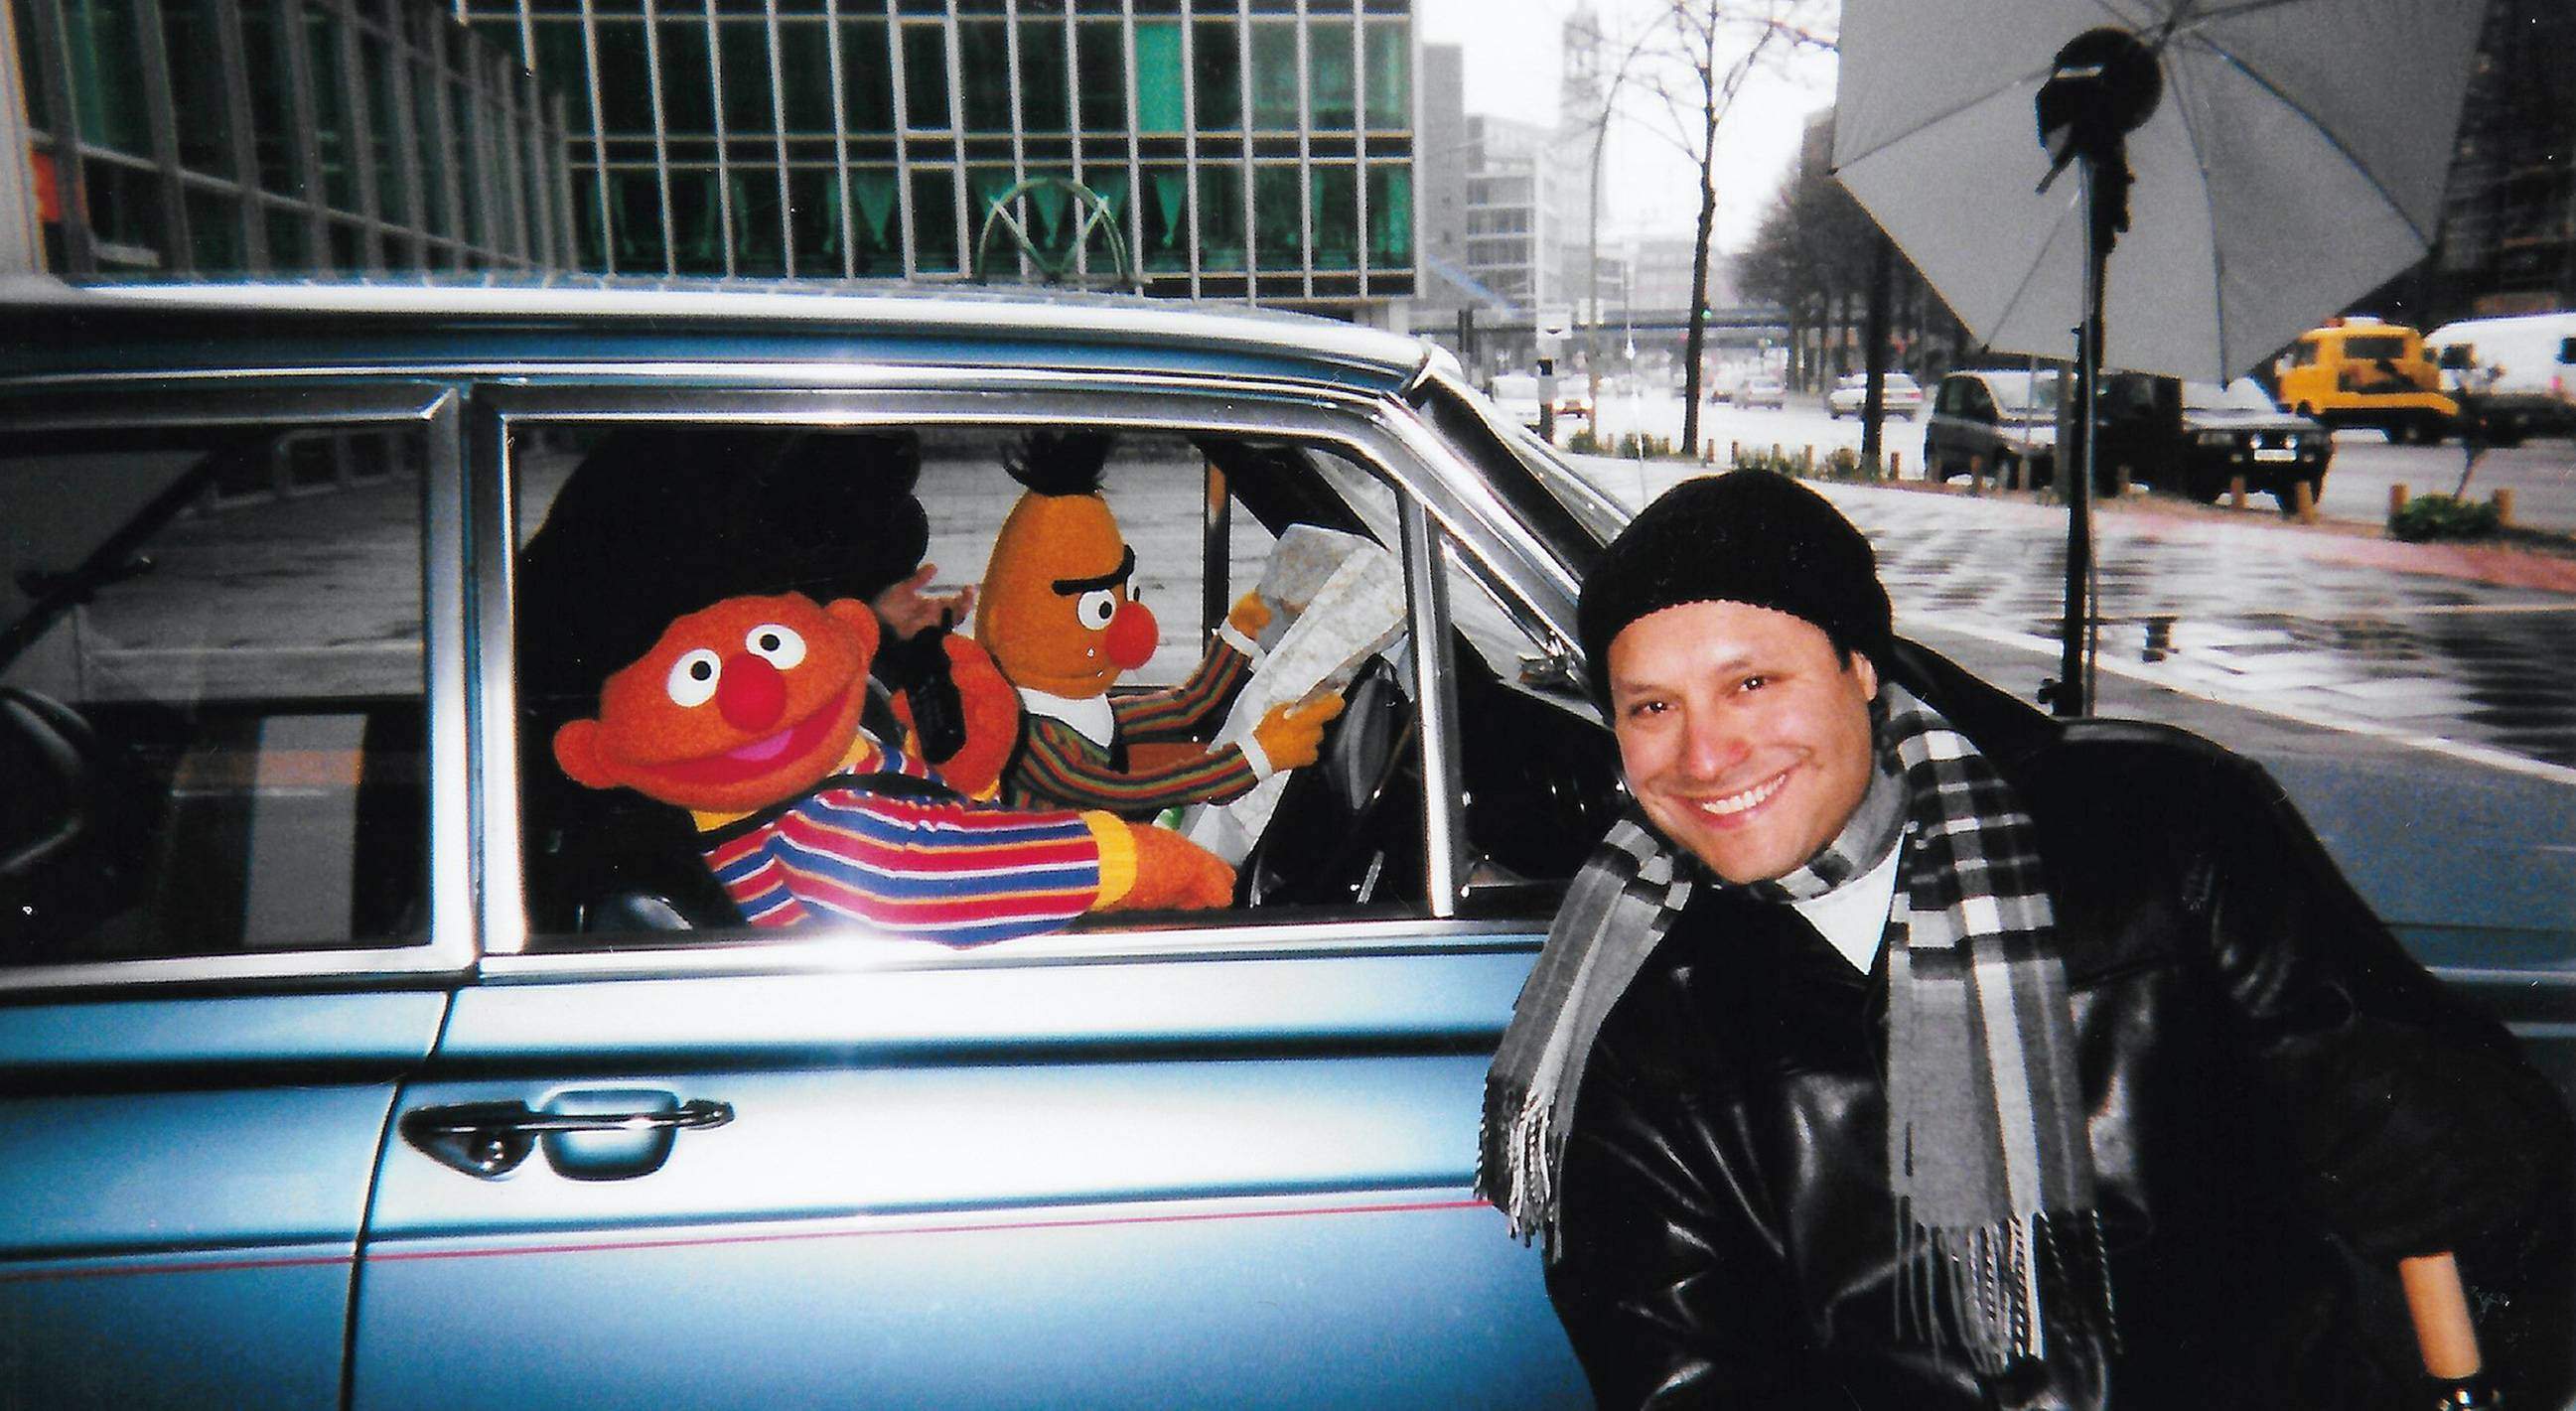 Estrada poses next to a car with Bert and Ernie from Sesame Street